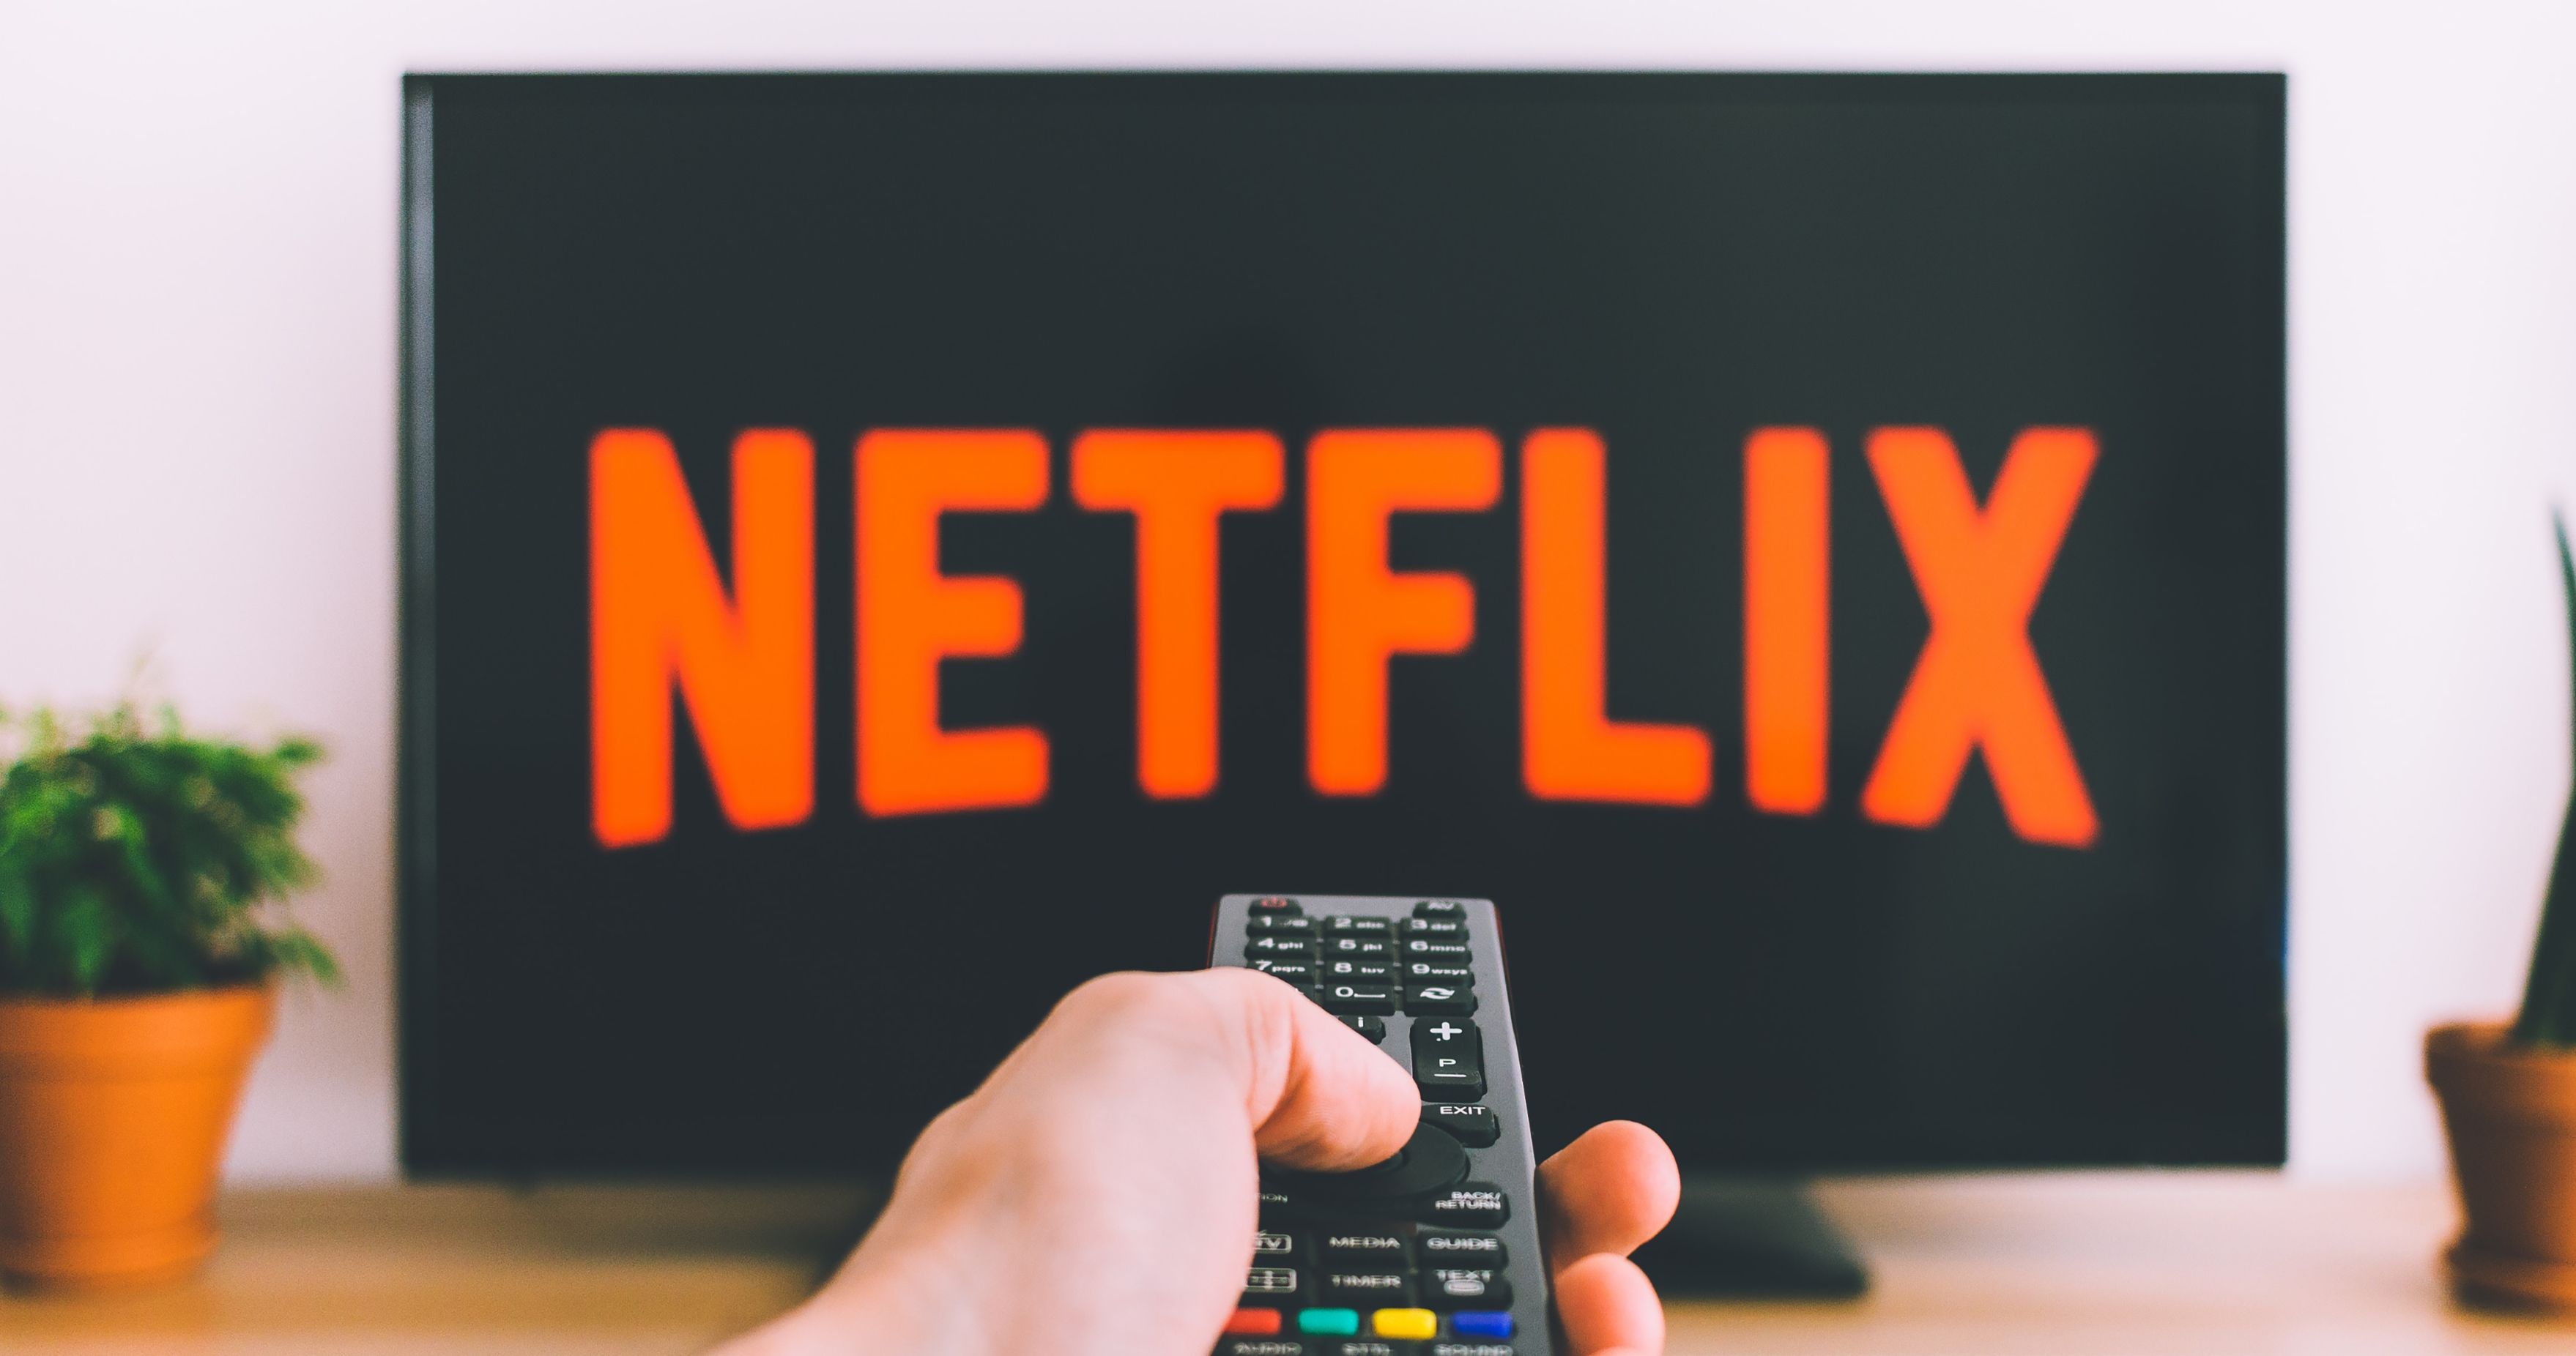 Subscribers Won't Ditch Netflix for Disney+ or Apple TV+ According to Survey